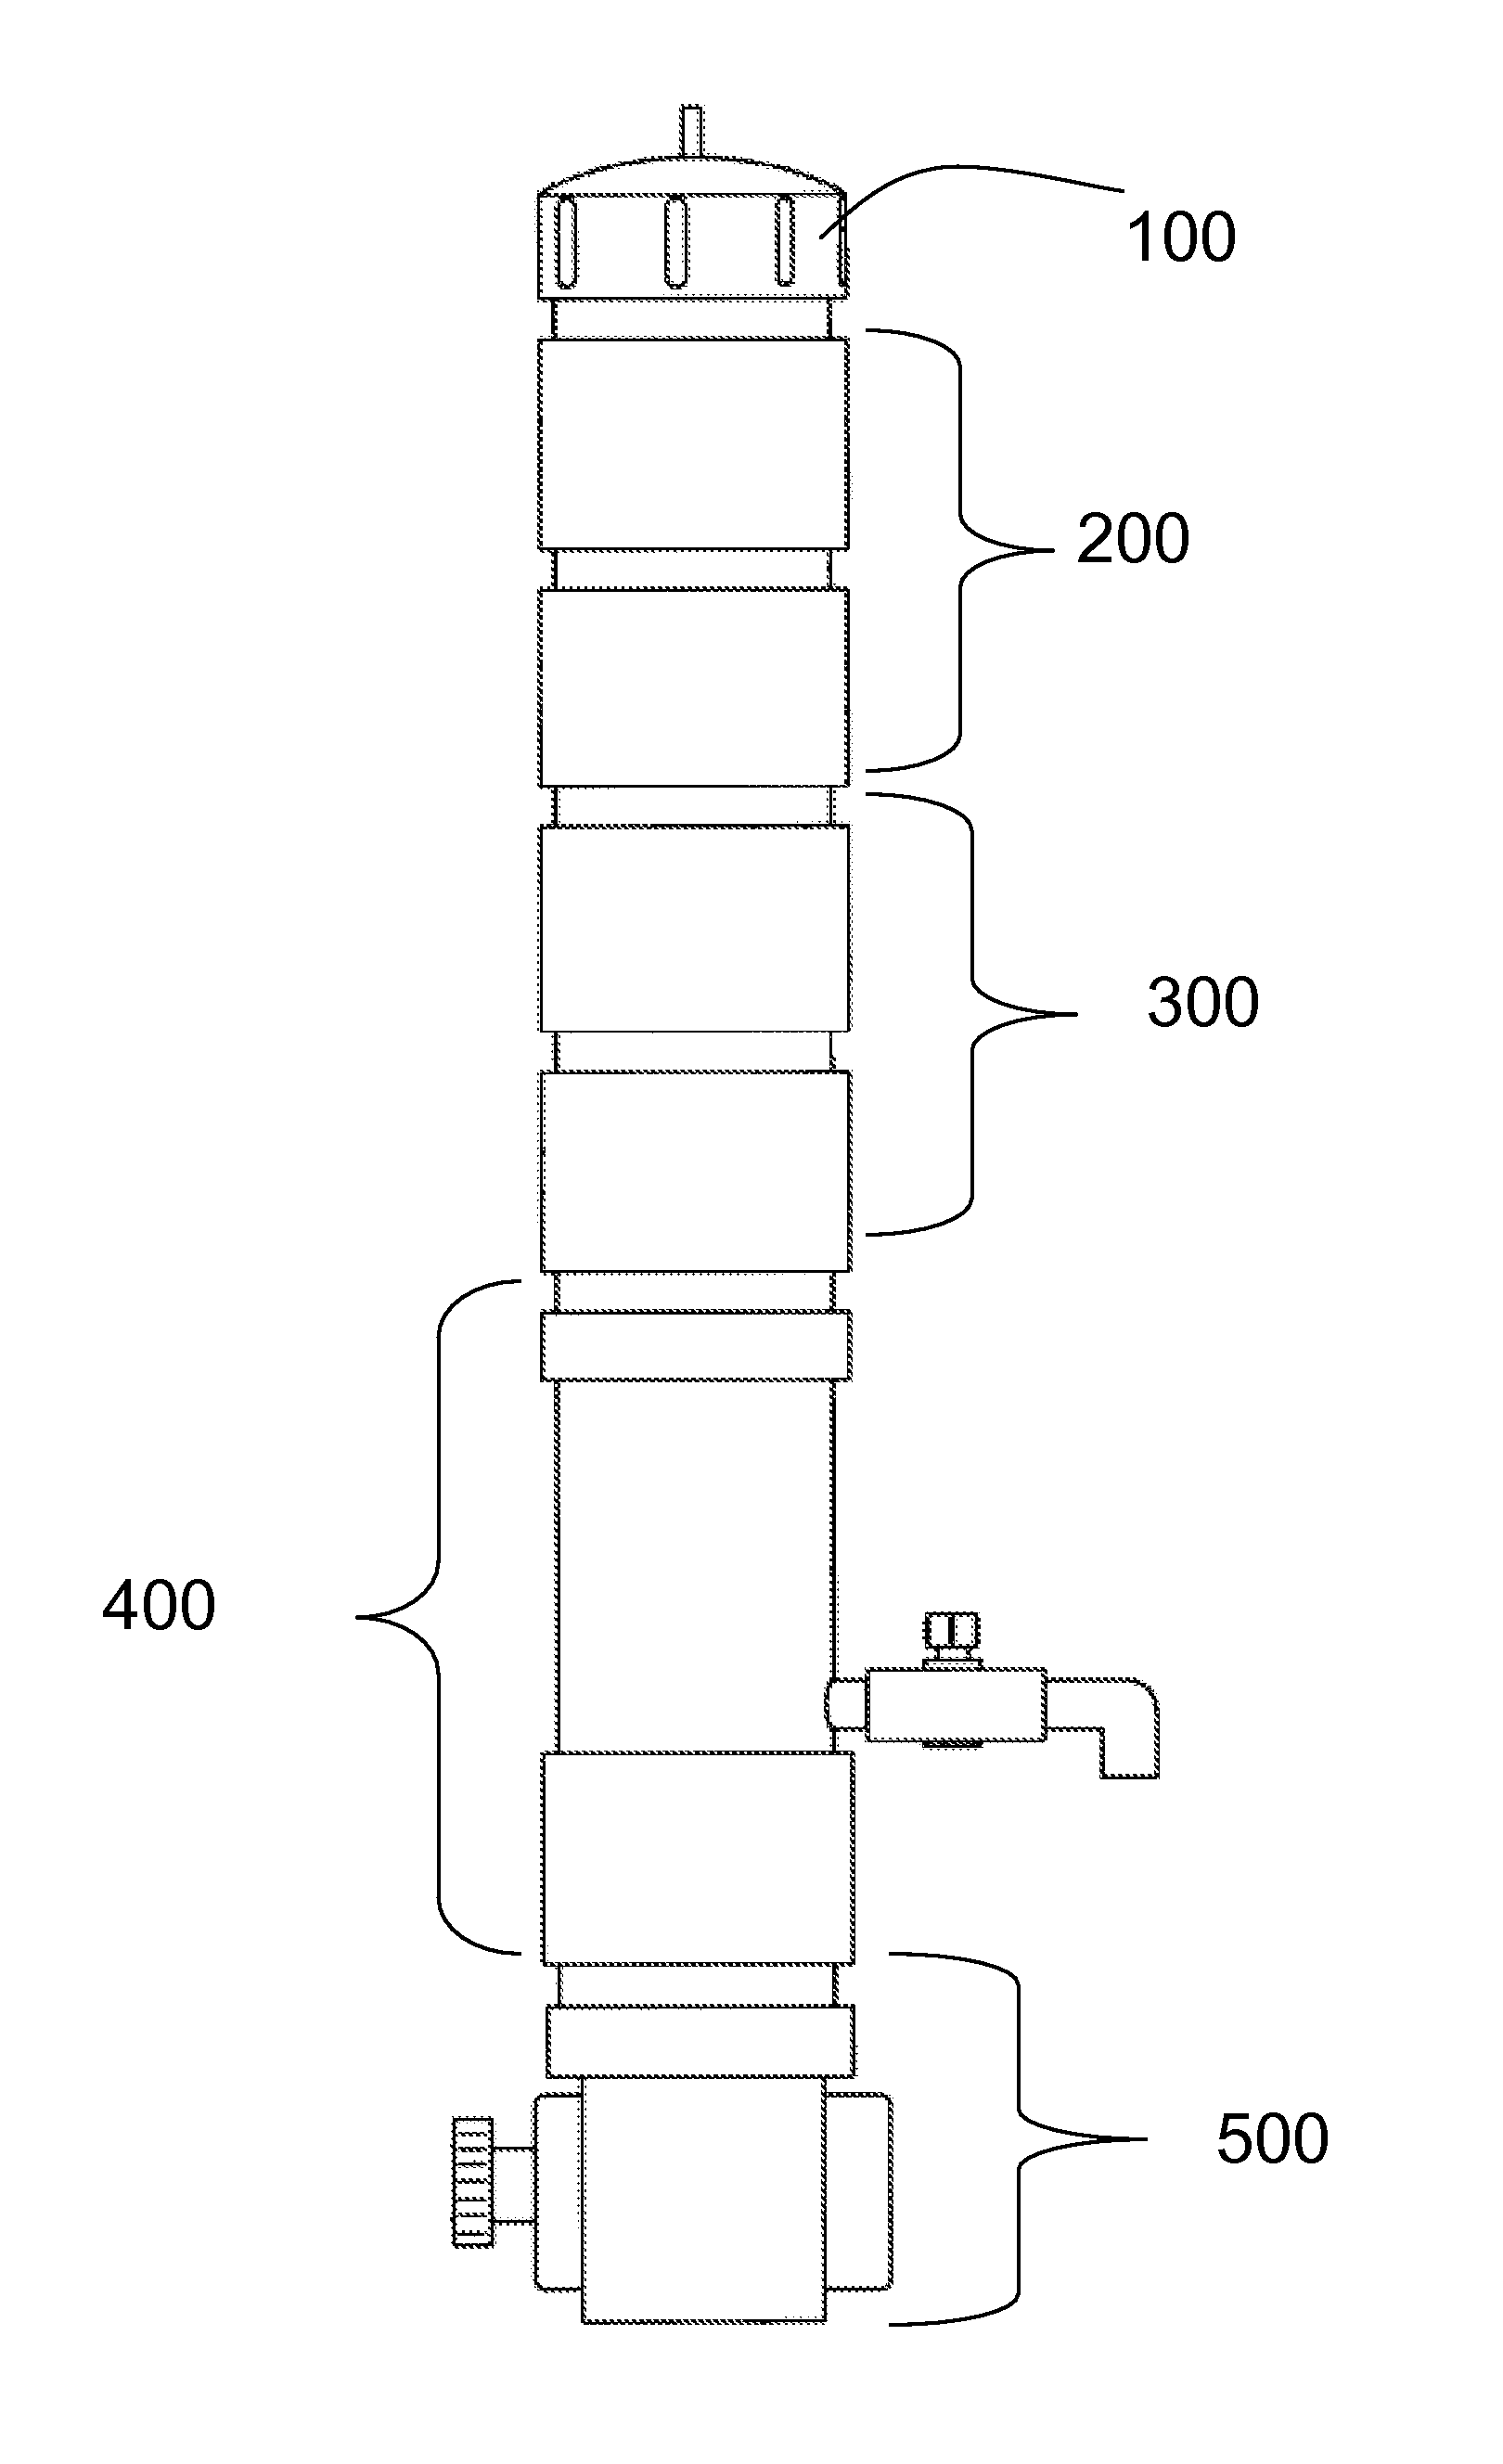 System and Method for Demonstrating Water Filtration and Purification Techniques